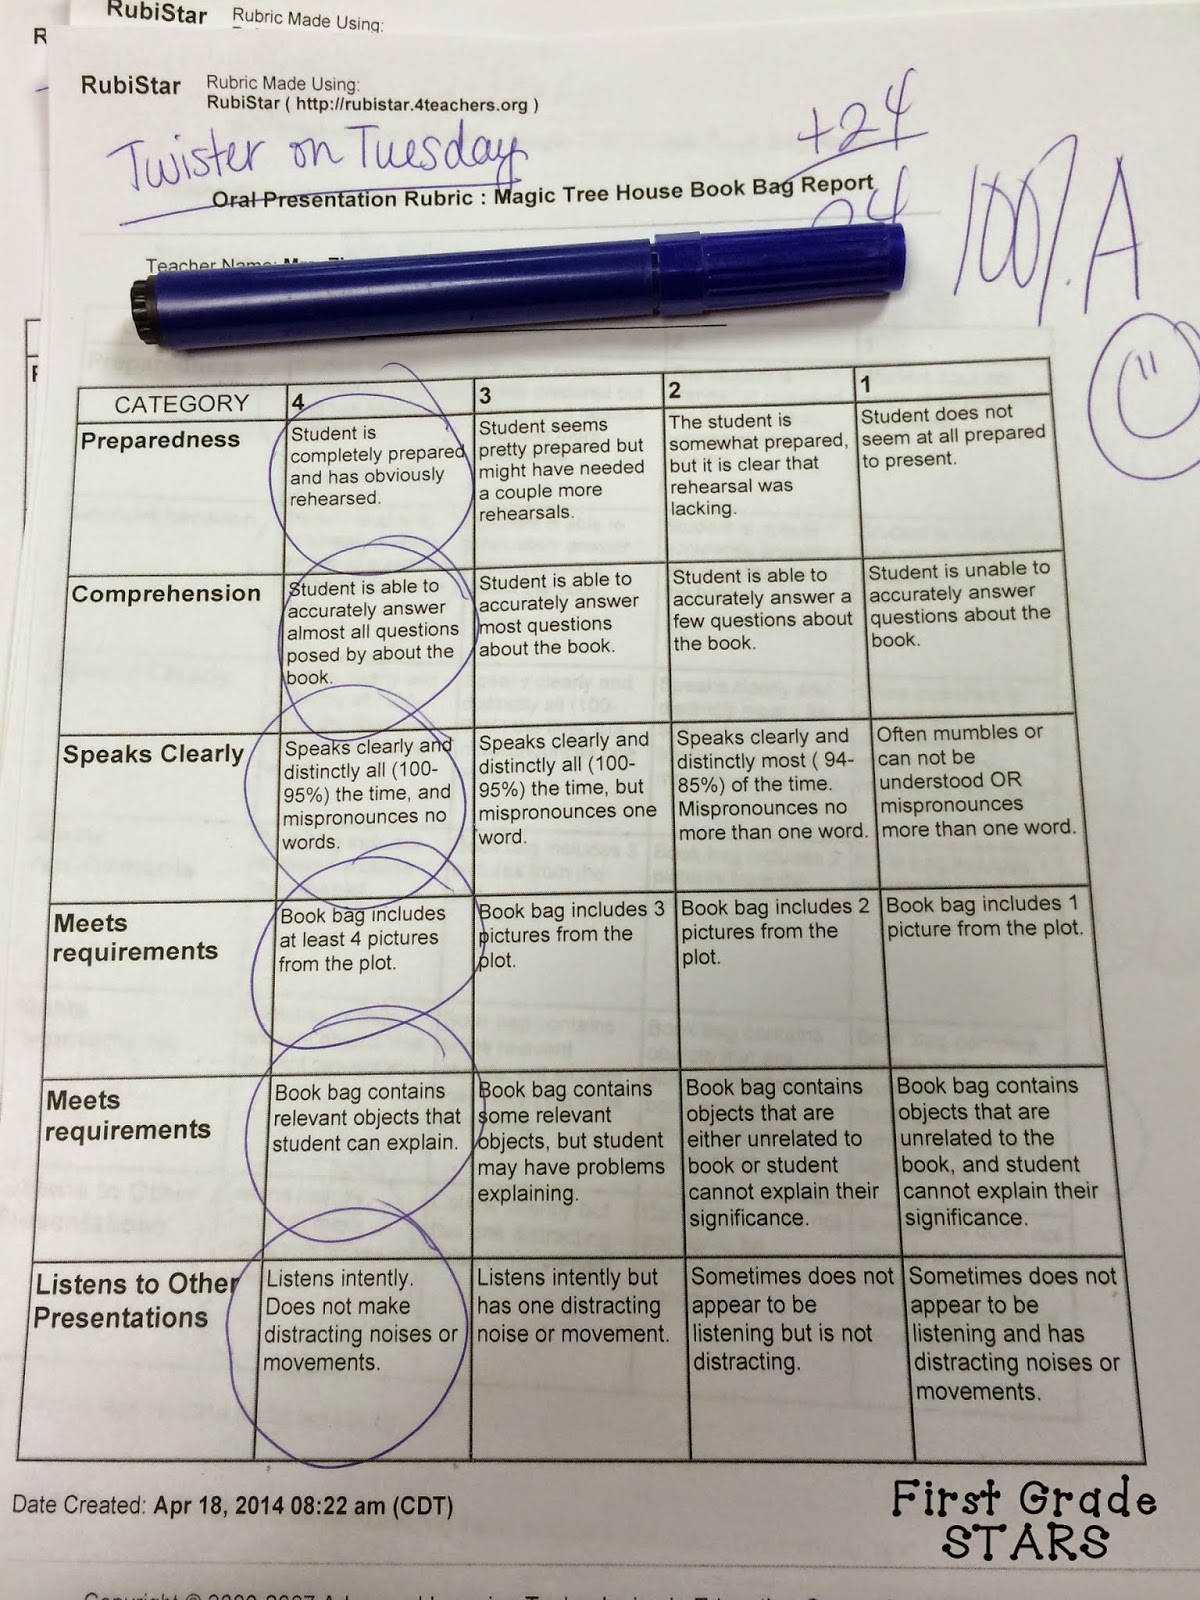 Rubric and book report